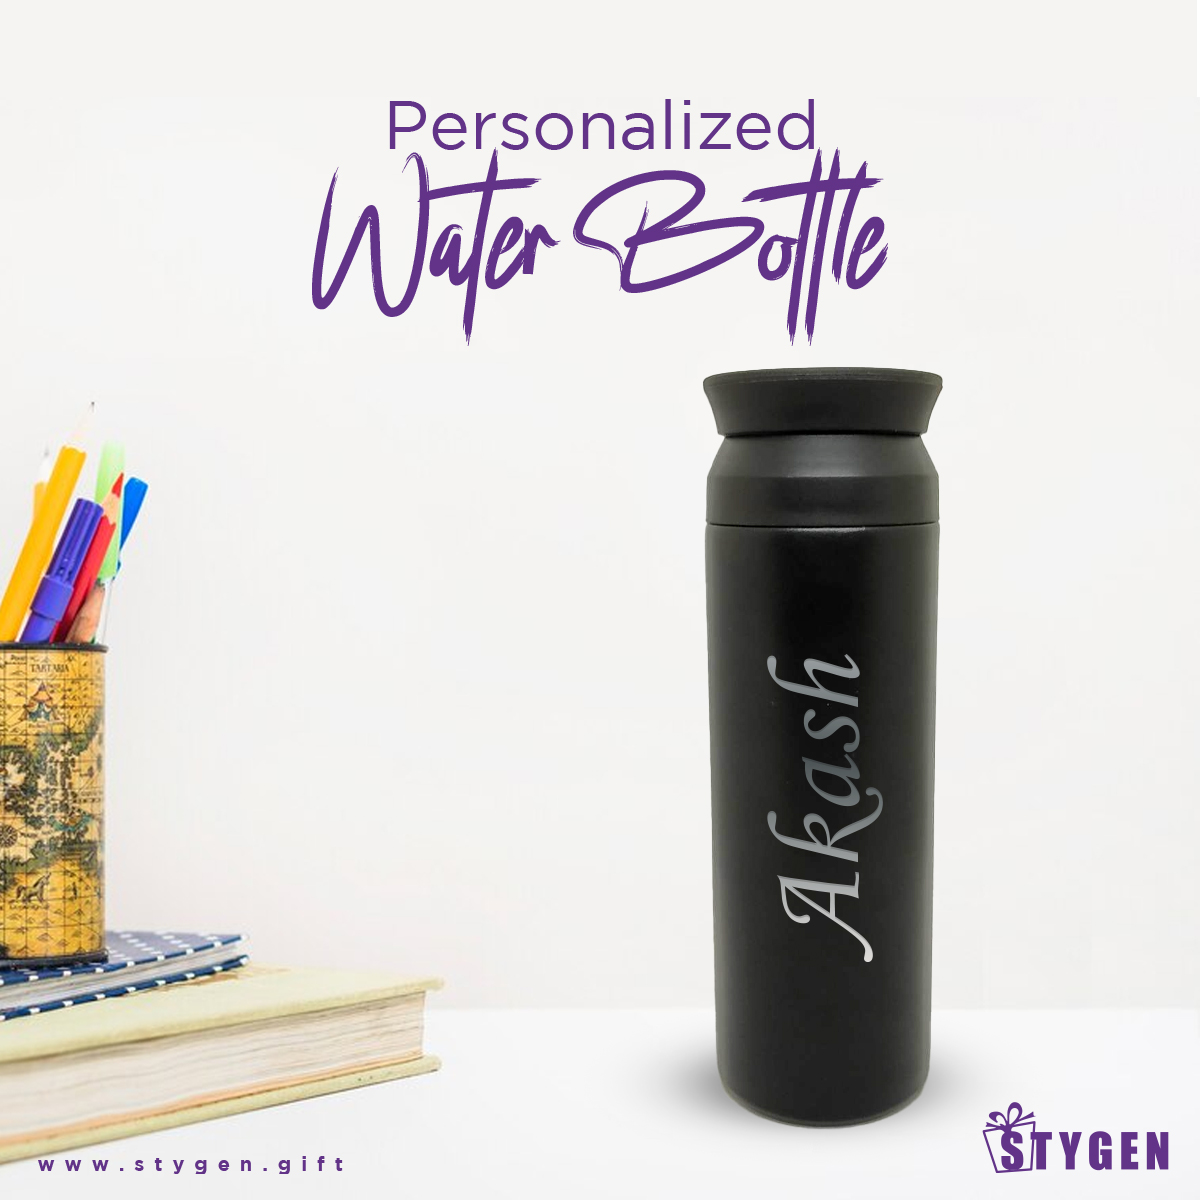 Personalized Thermos Water Bottle for your loved one (10)